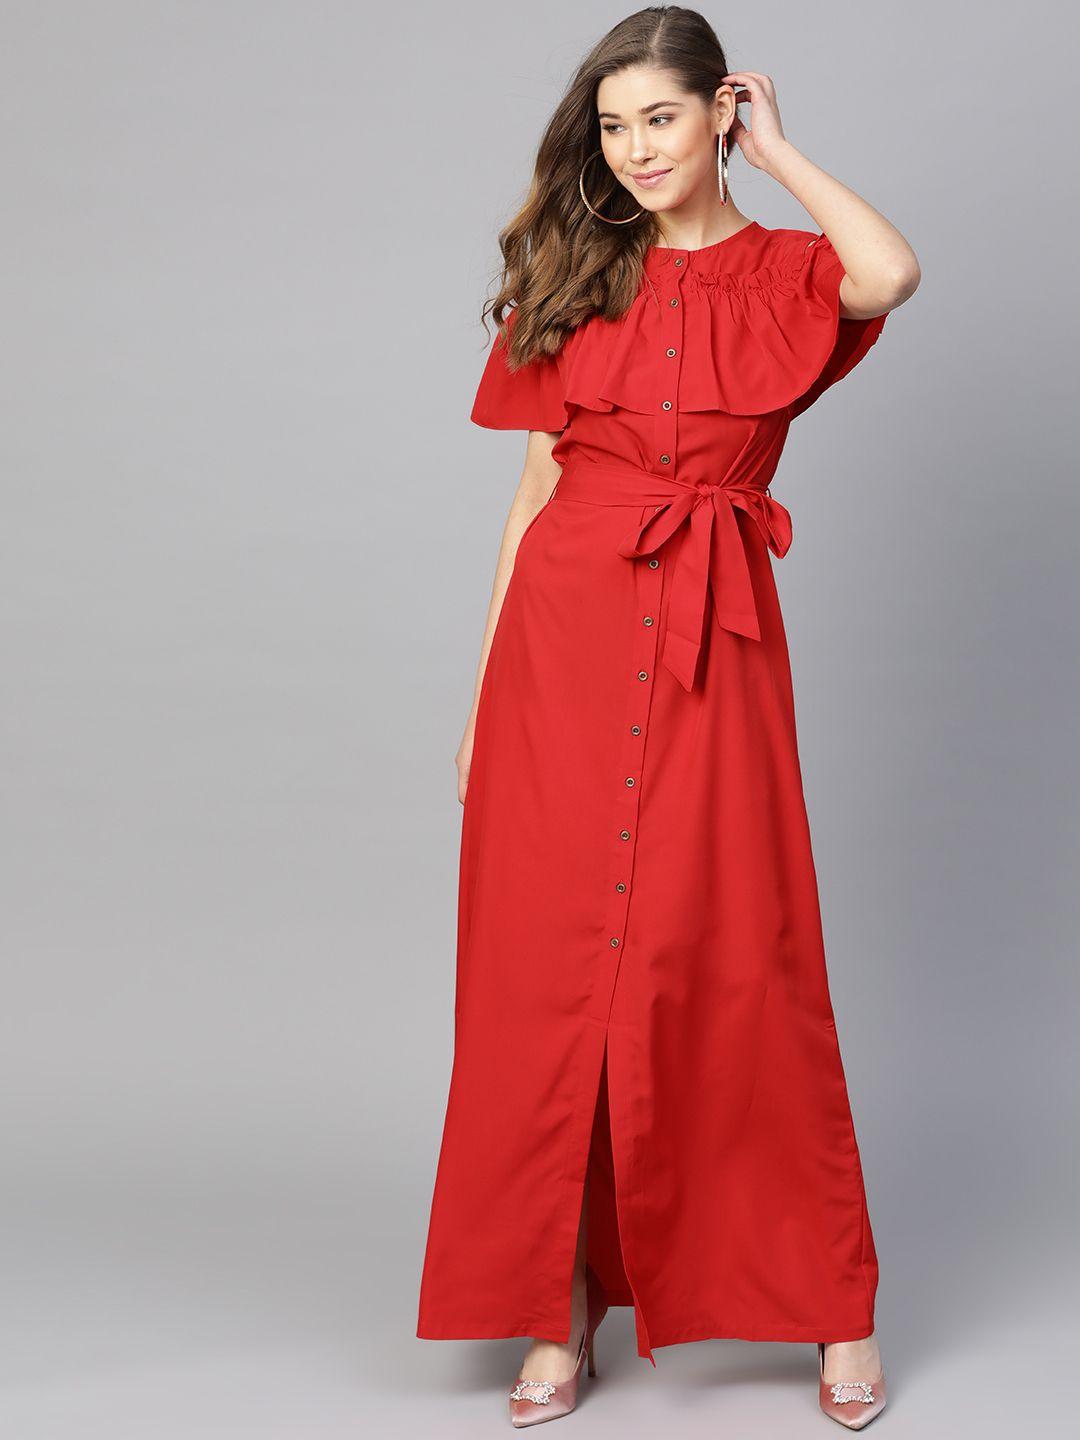 uptownie lite women red solid ruffle maxi dress with cold shoulder sleeves